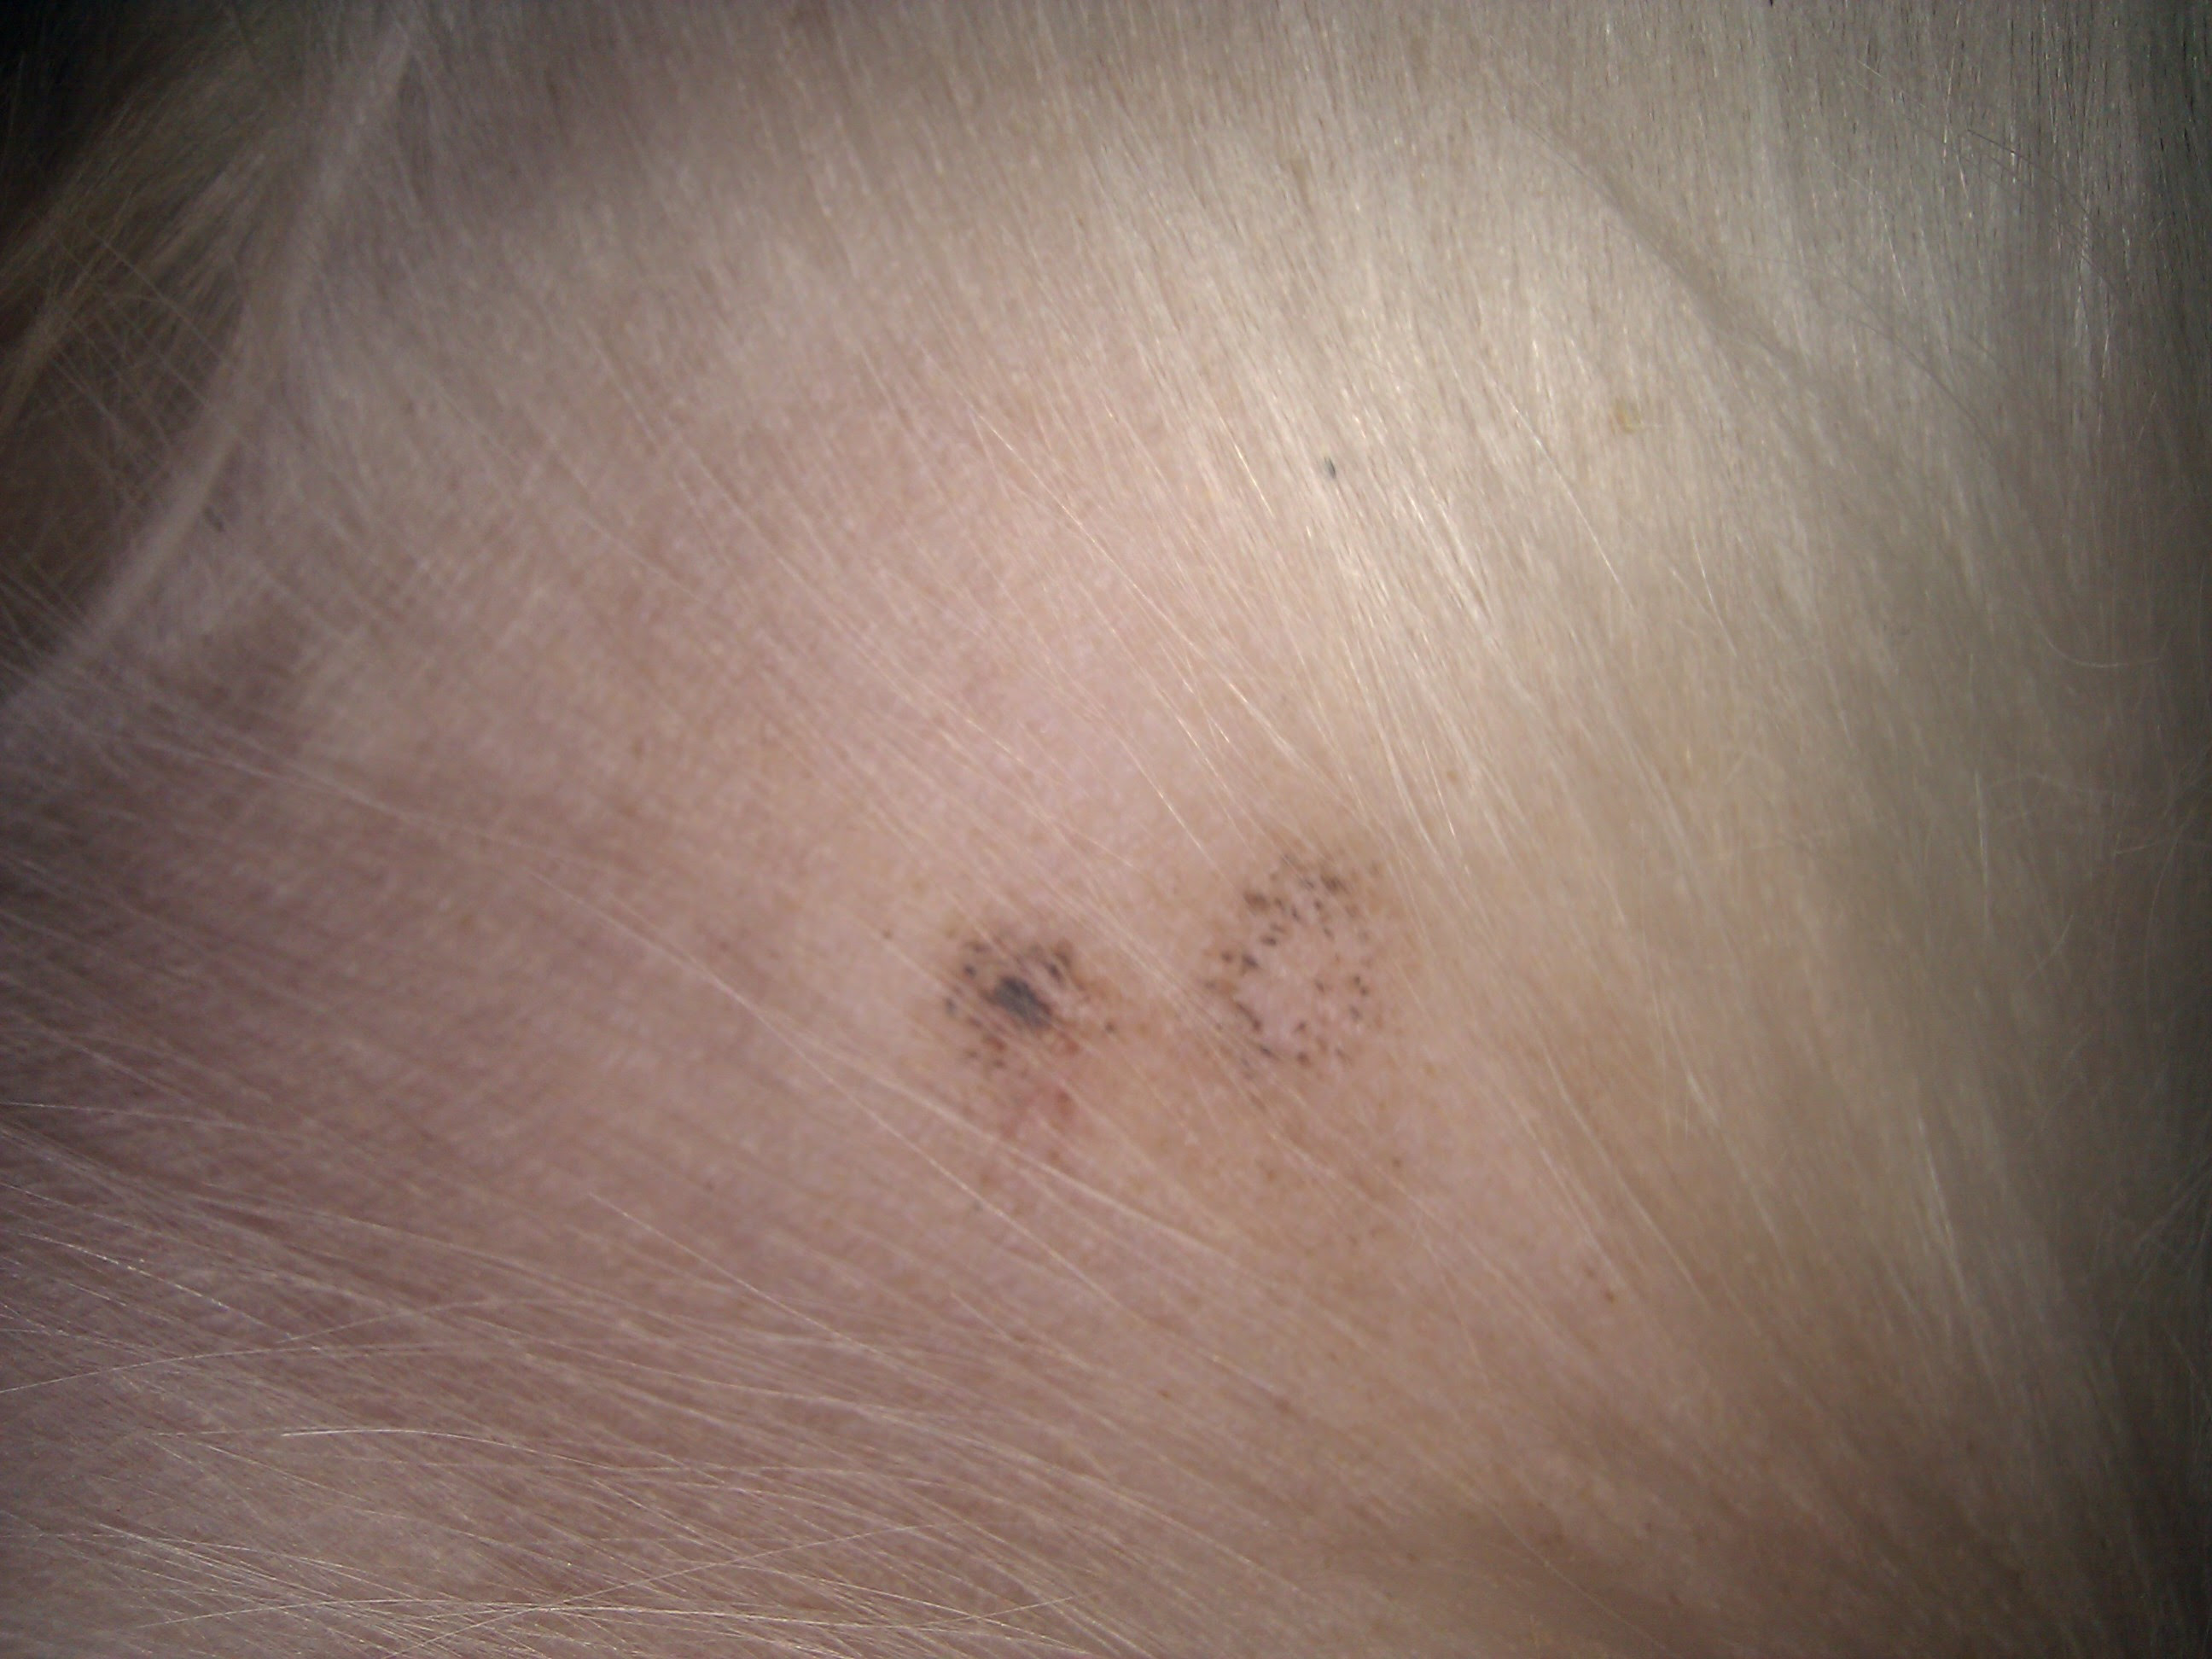 Black Spots On Dog Skin Itchy Images For Life